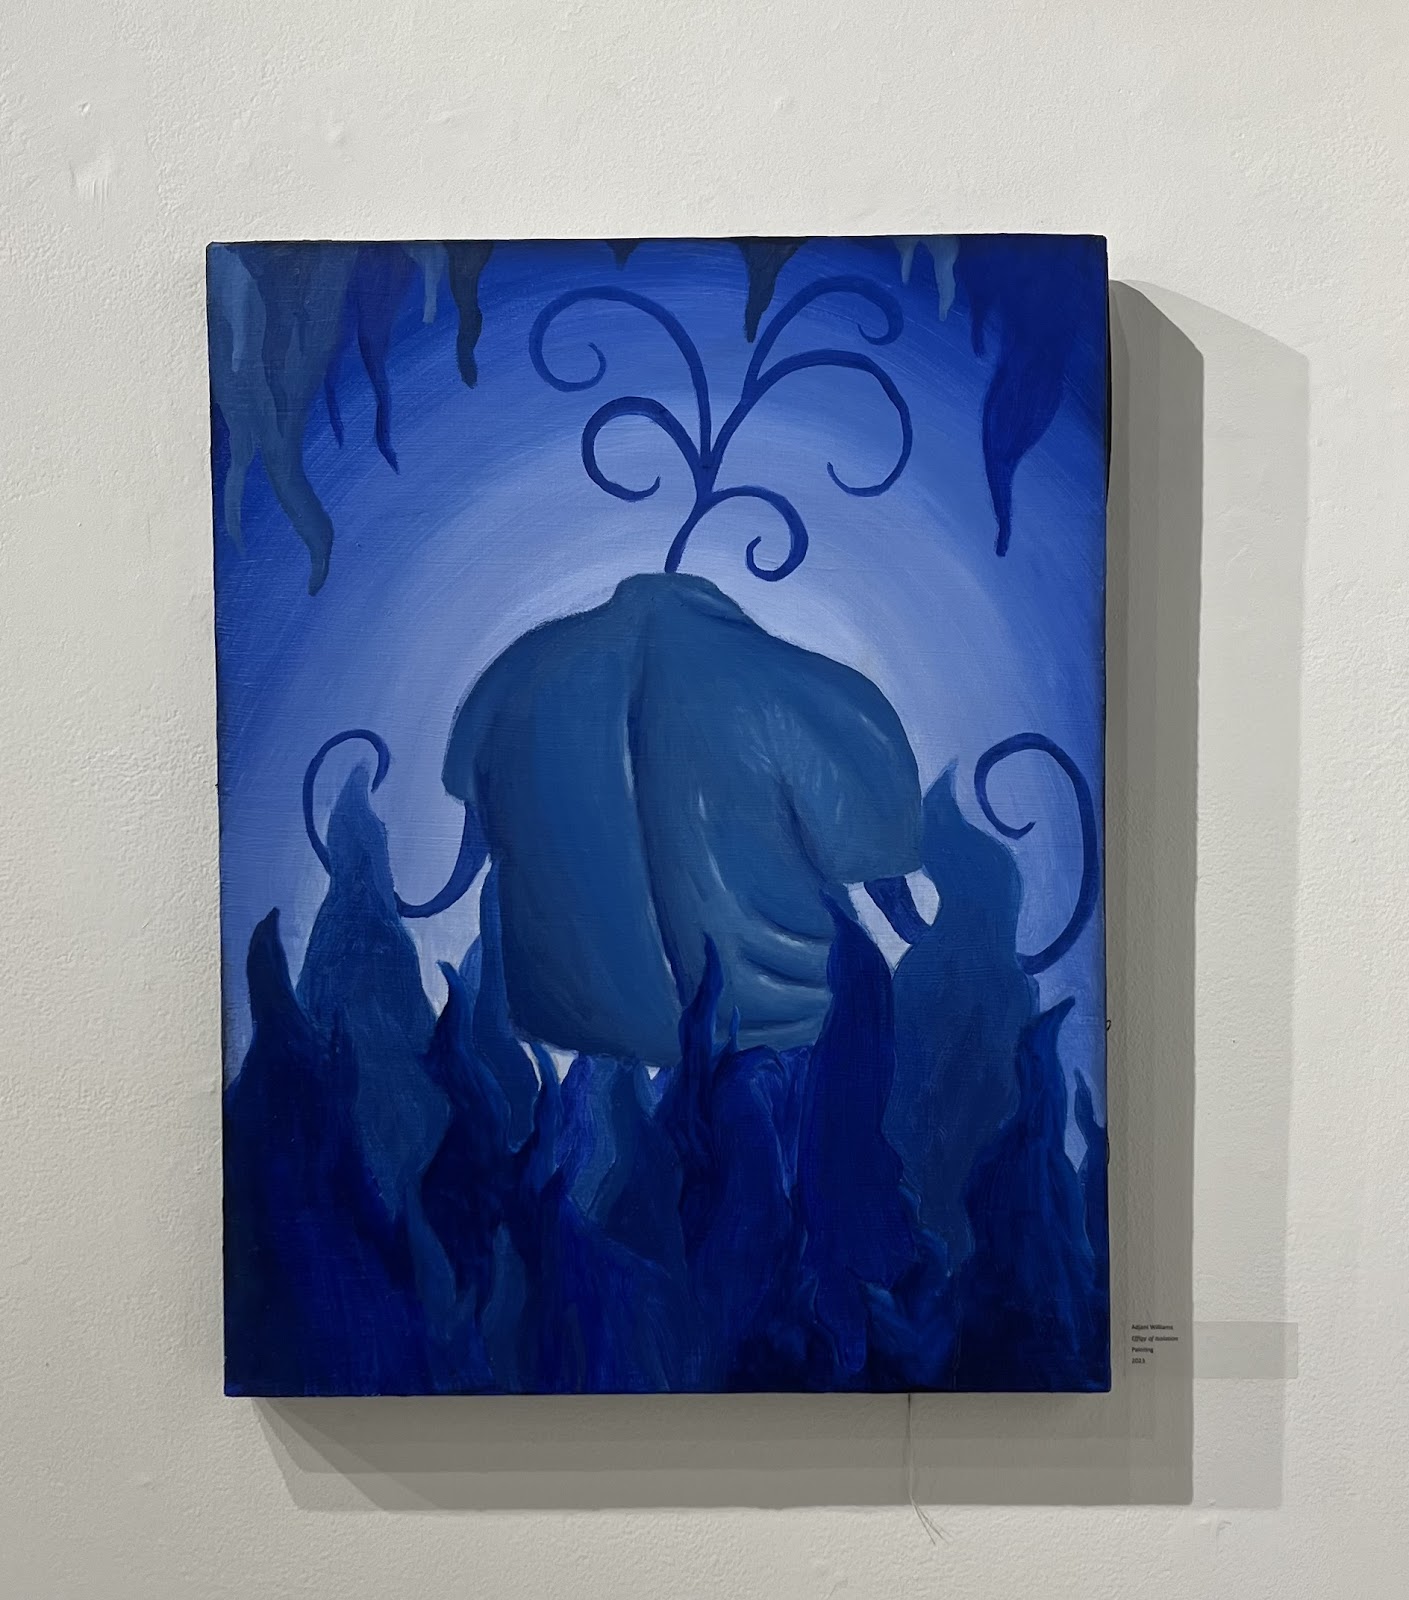 The blue body of Williams sits in a blue fiery and woodsy facing away from the viewer as sprouts grow from his arms.